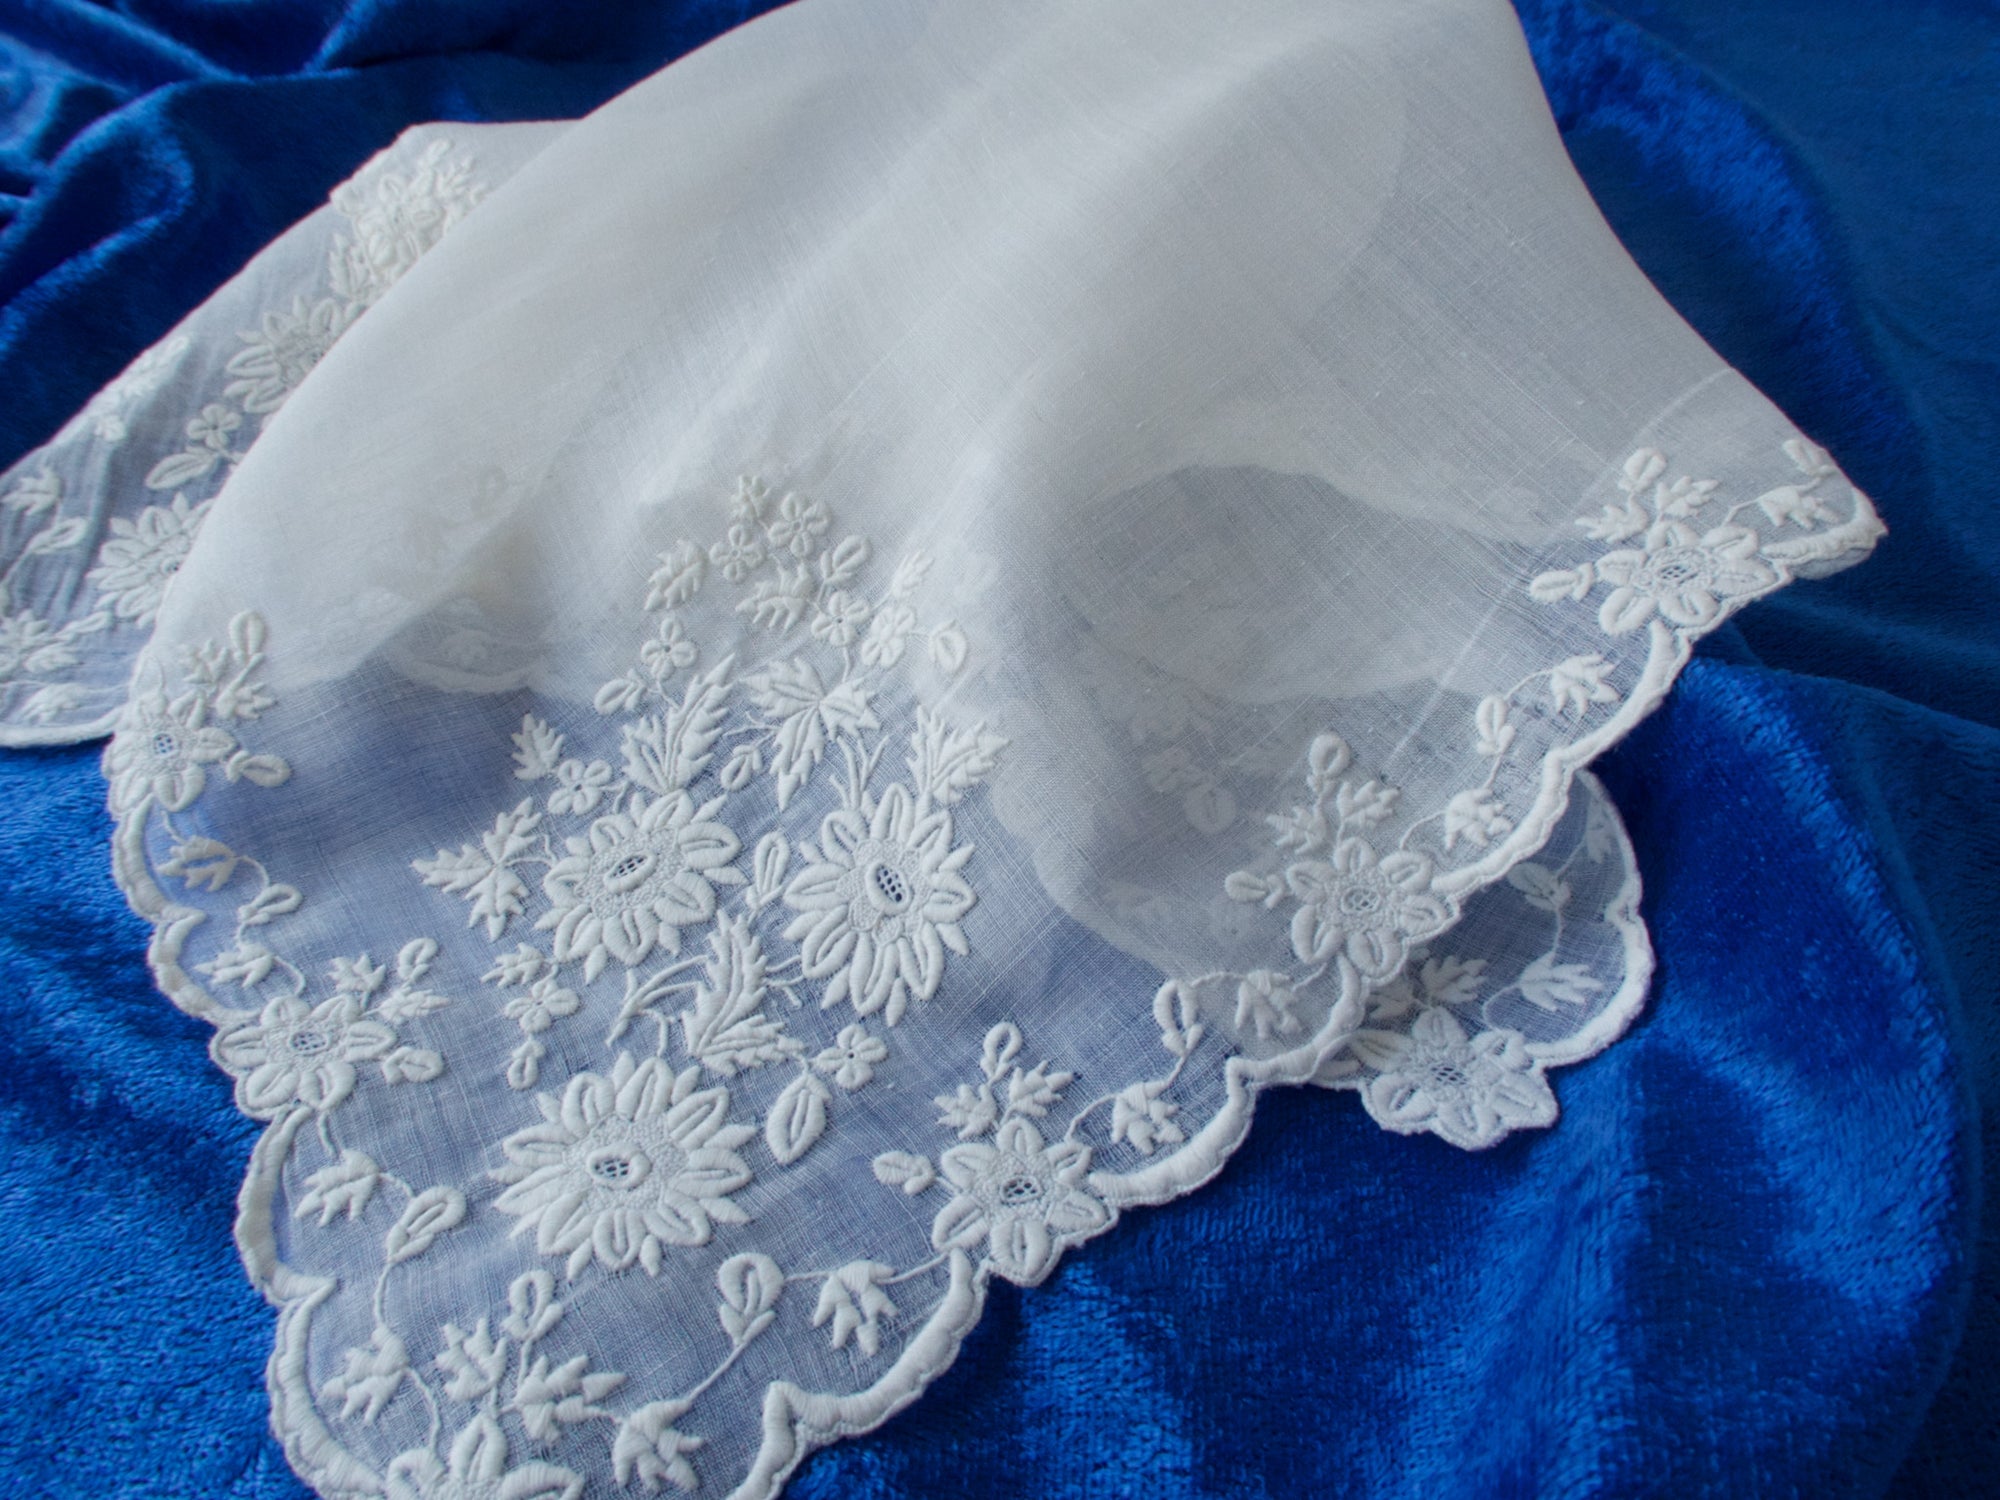 Antique 19th Century French Whitework Lace Handkerchief 17"